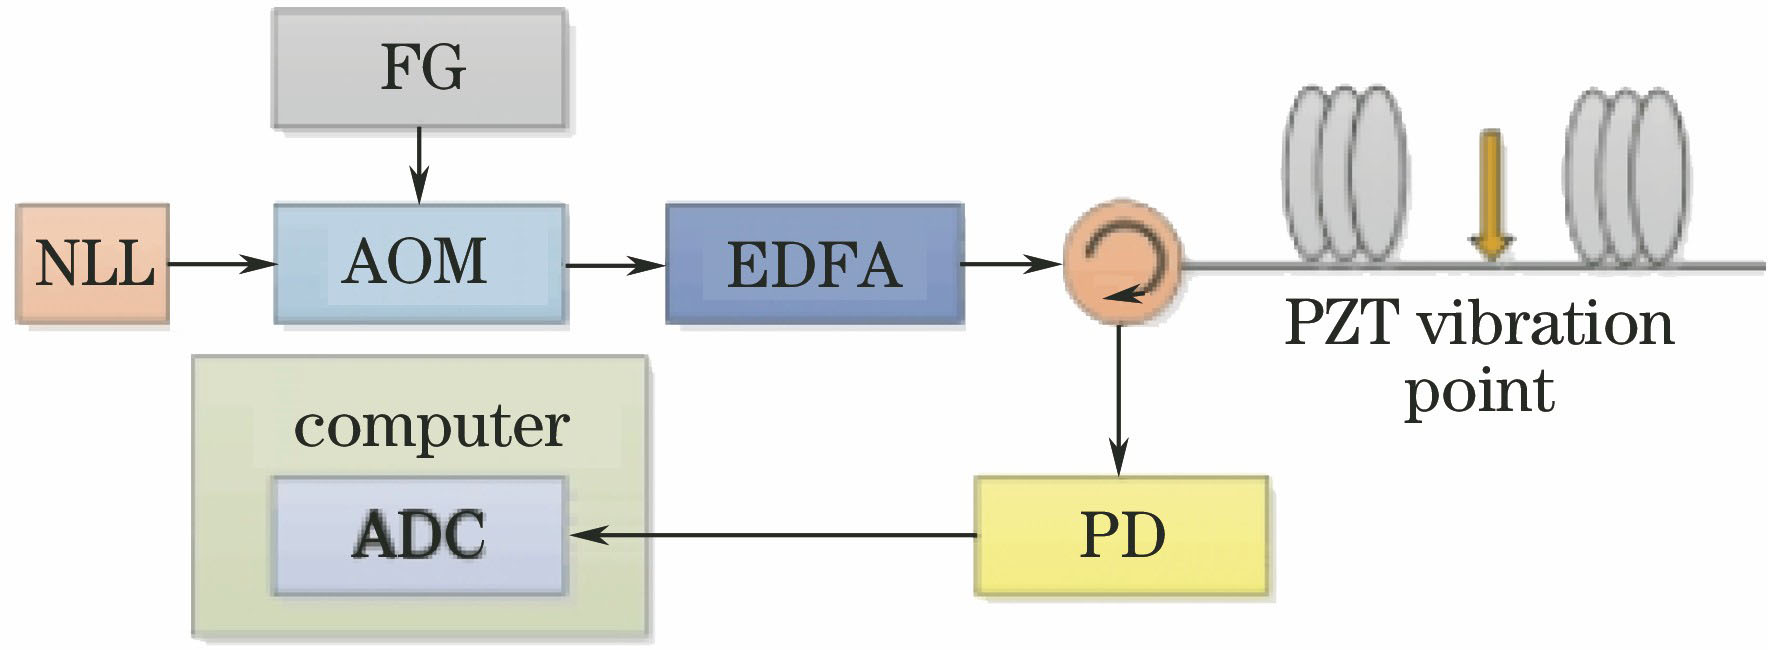 Schematic diagram of distributed vibration sensing system based on Φ-OTDR